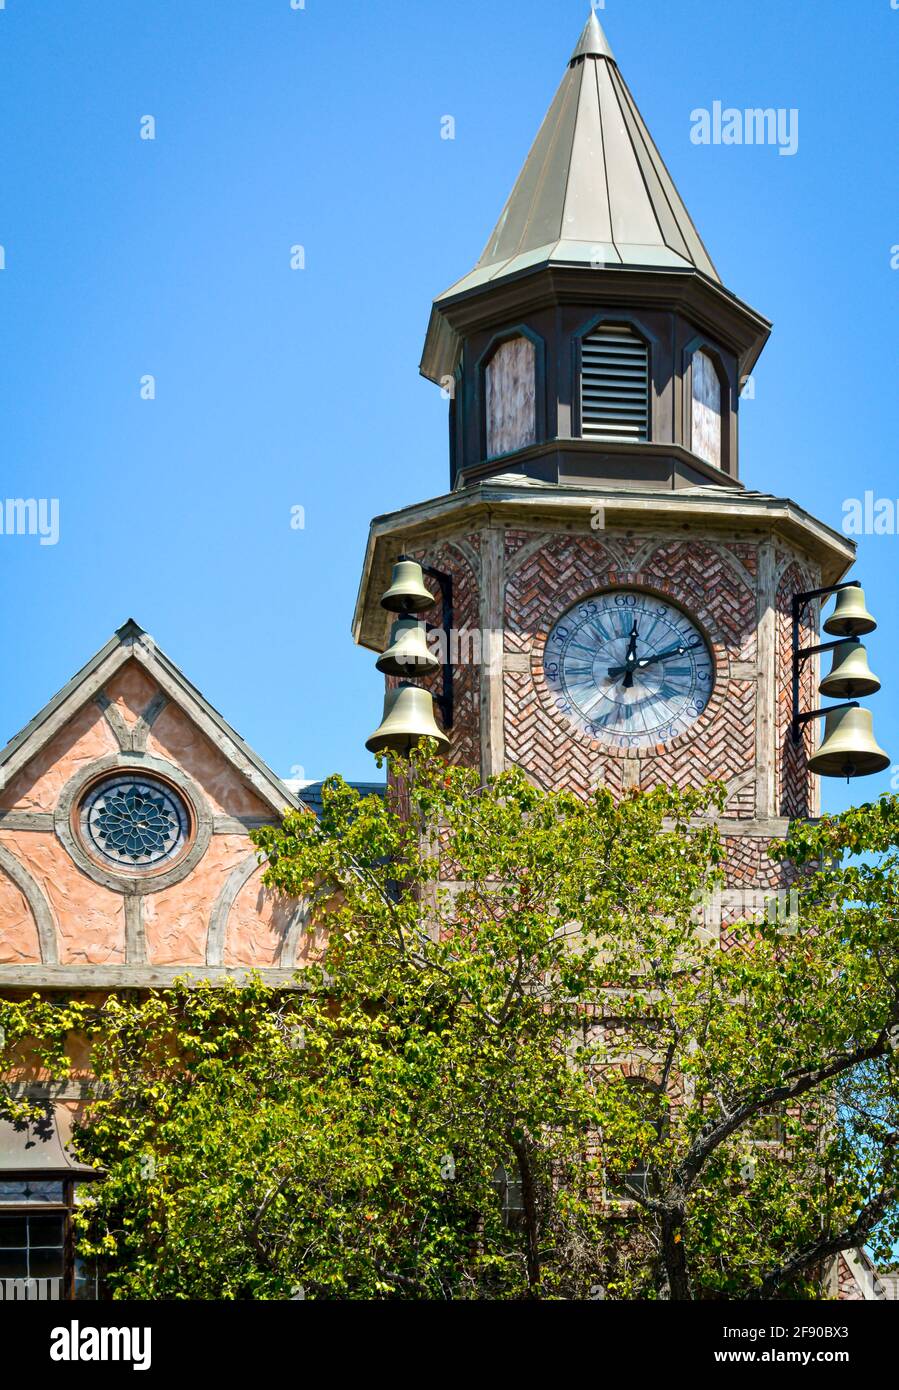 Architectural details of whimsey and texture of the Old Mill House Clock Tower building in Solvang, CA , USA Stock Photo